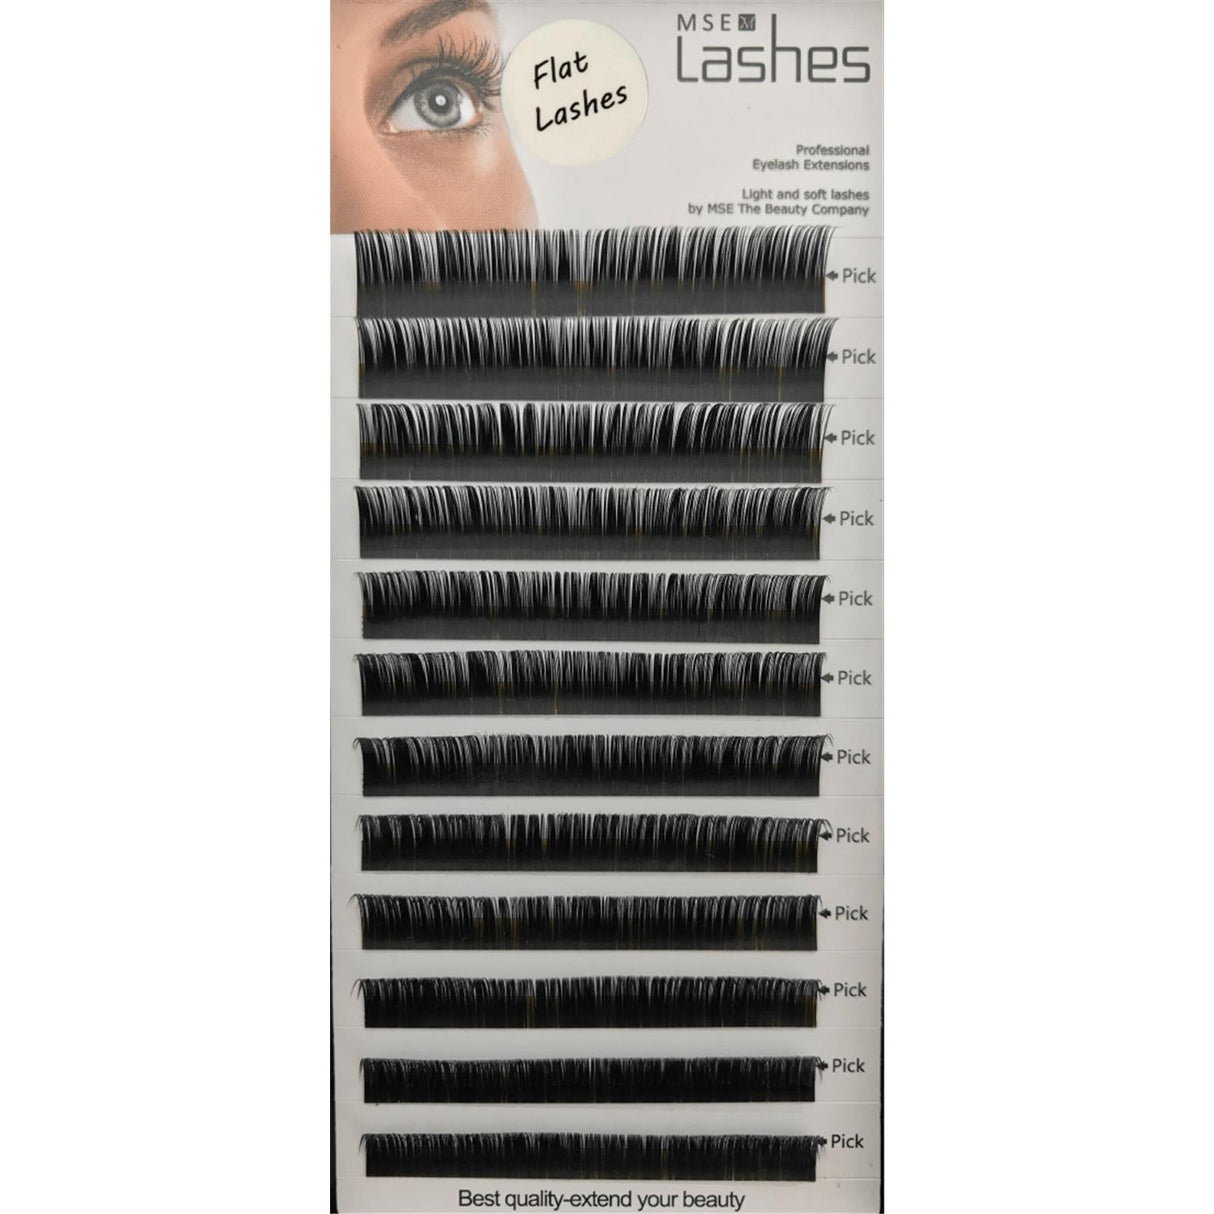 Seidenwimpern Flat Lashes Trays - D-Curl - 0,15 mm - 9 mm - MSE - The Beauty Company